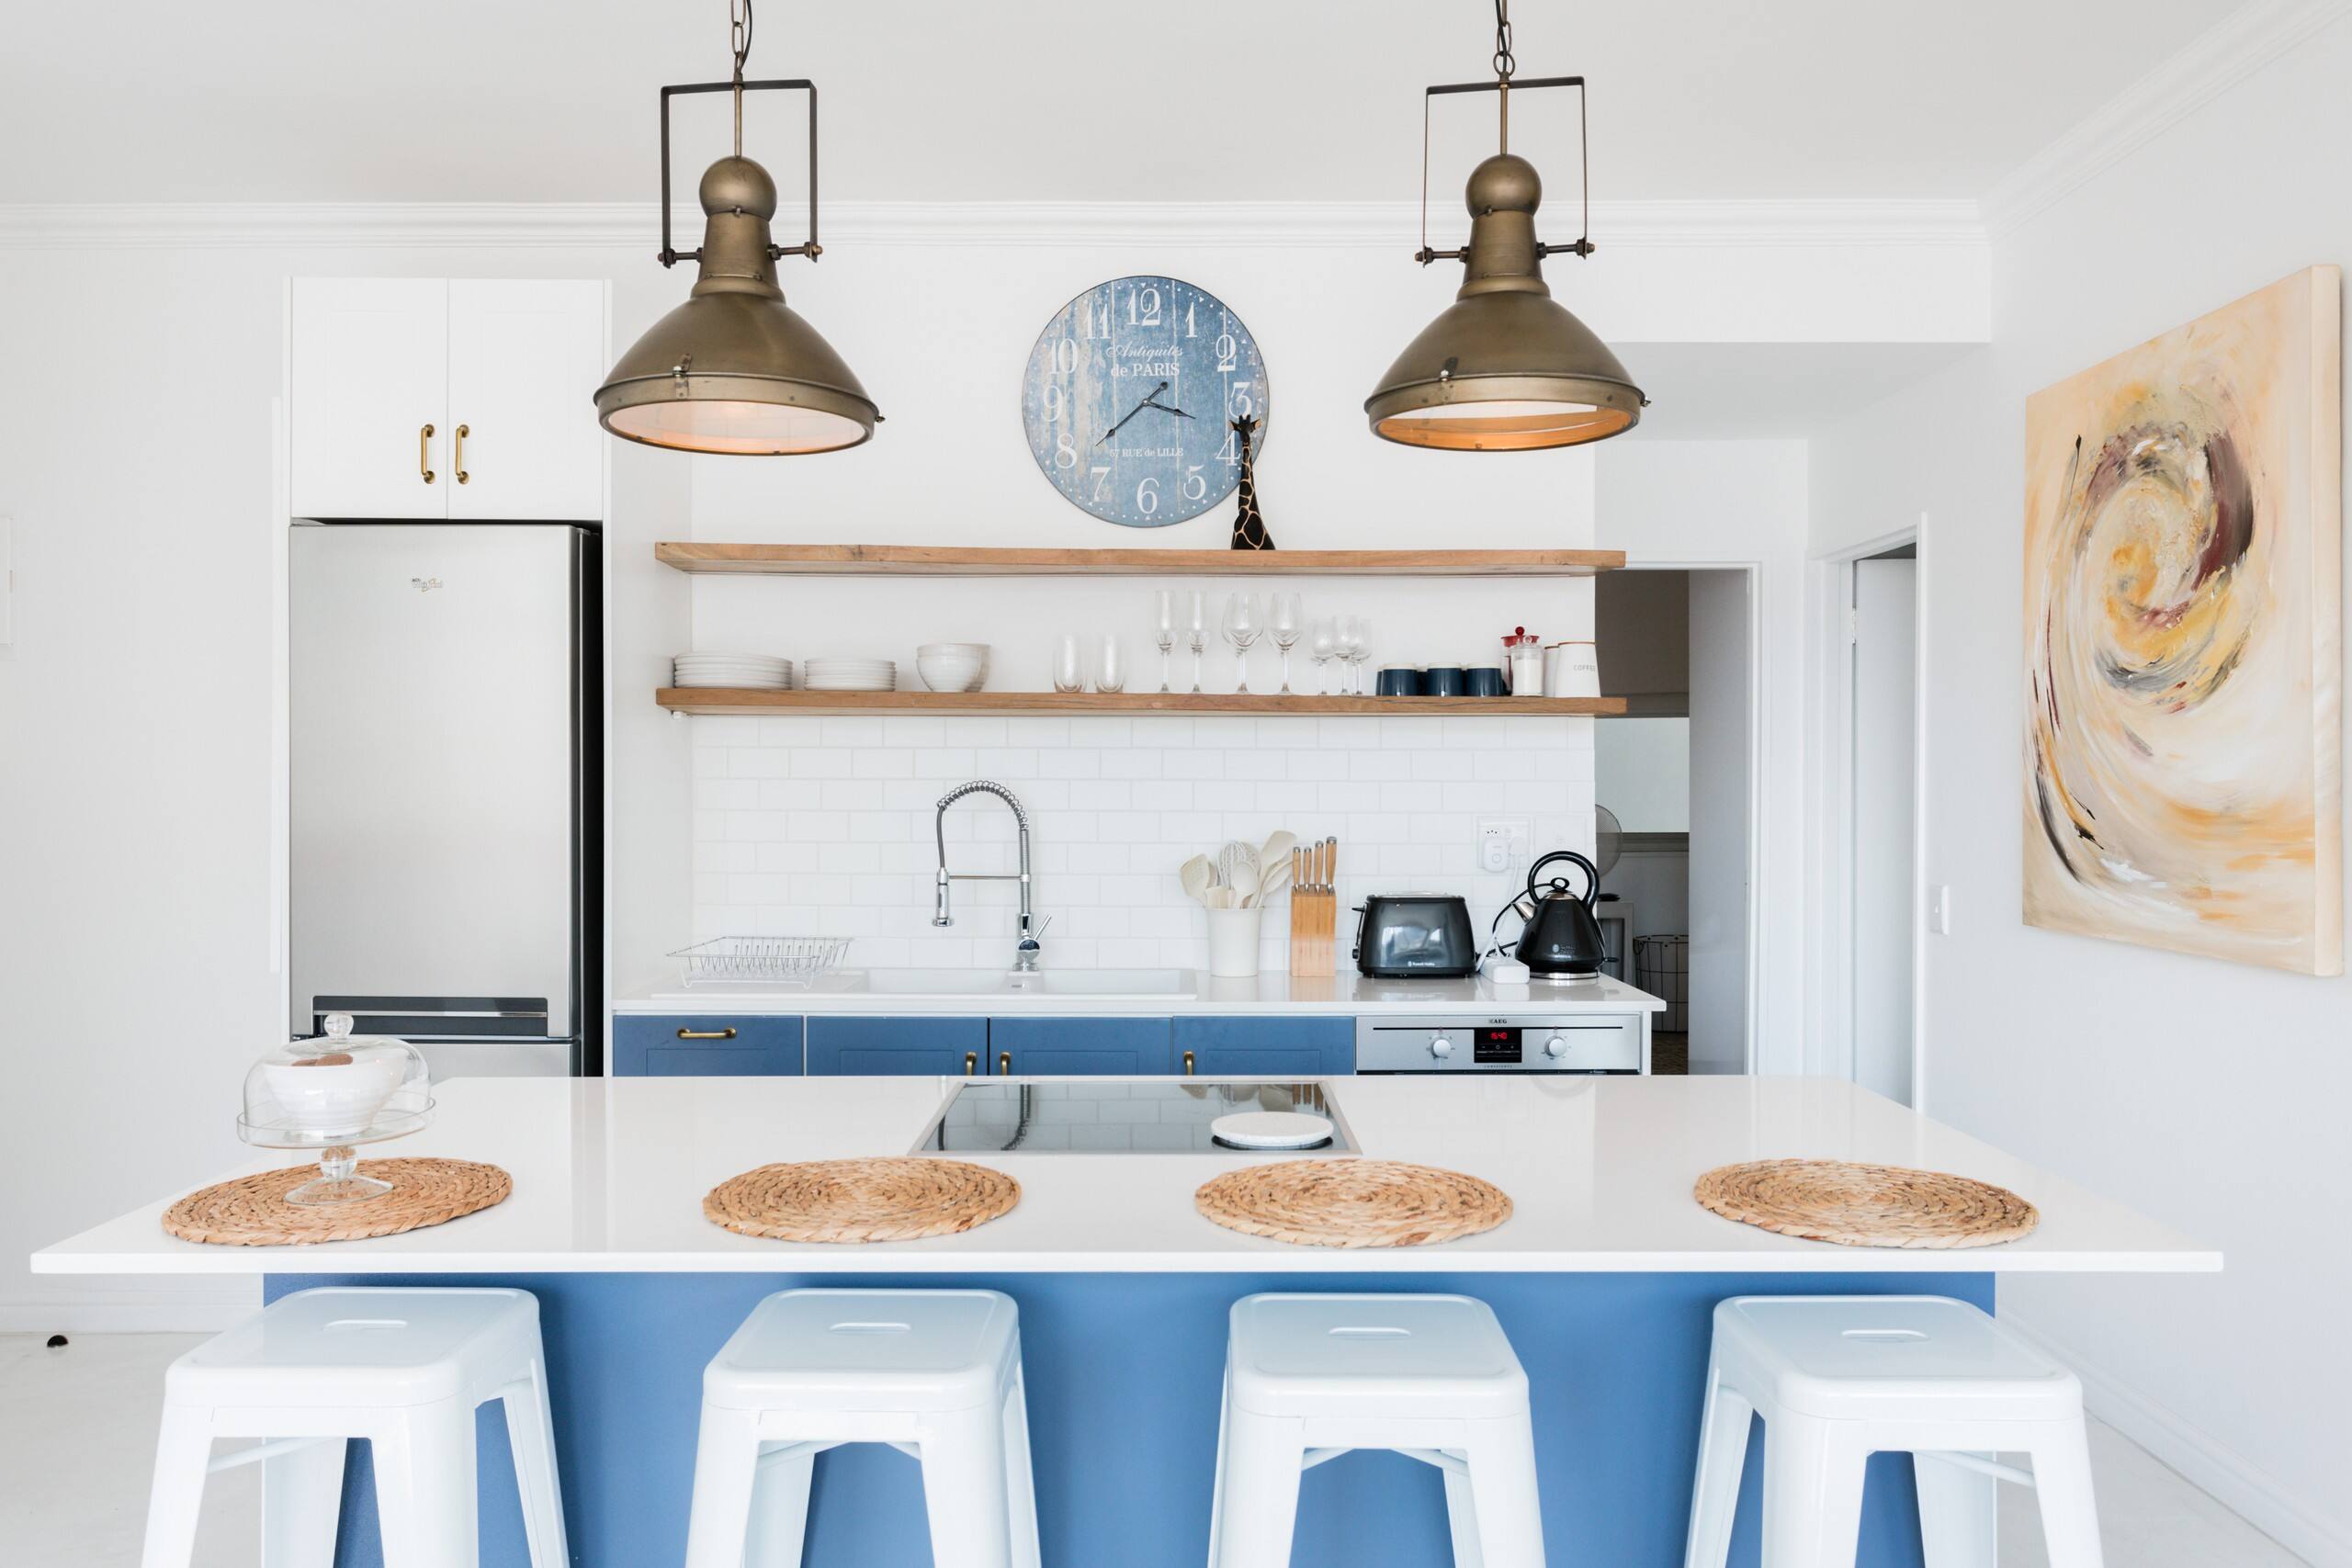 A minimalist kitchen with blue cabinetry and kitchen island siding.